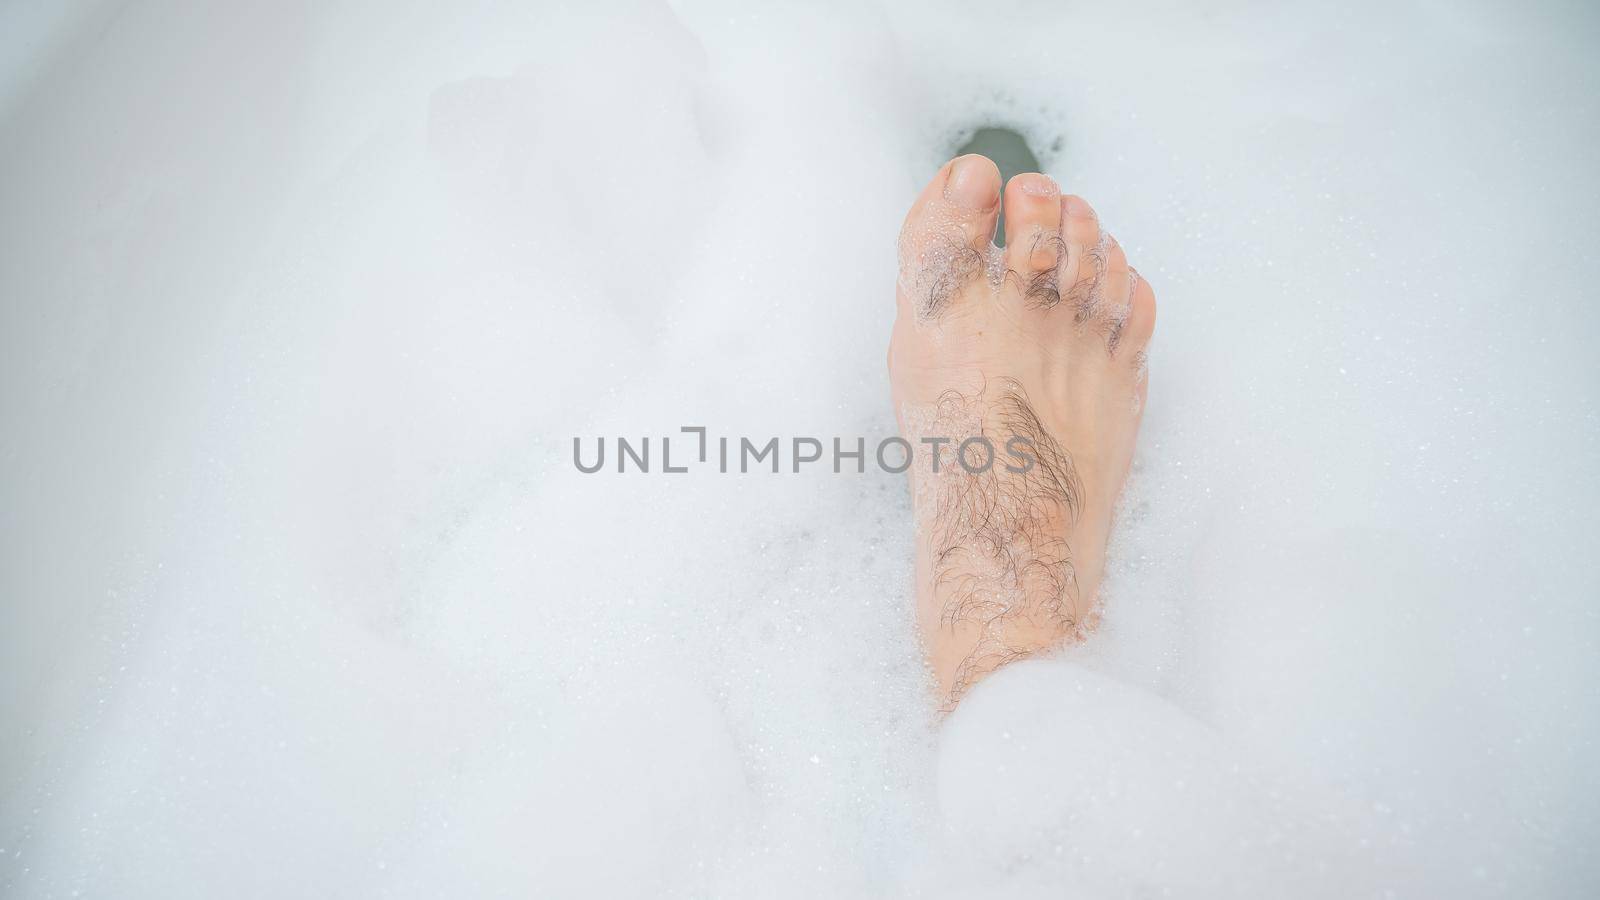 Funny picture of a man taking a relaxing bath. Close-up of male feet in a bubble bath.